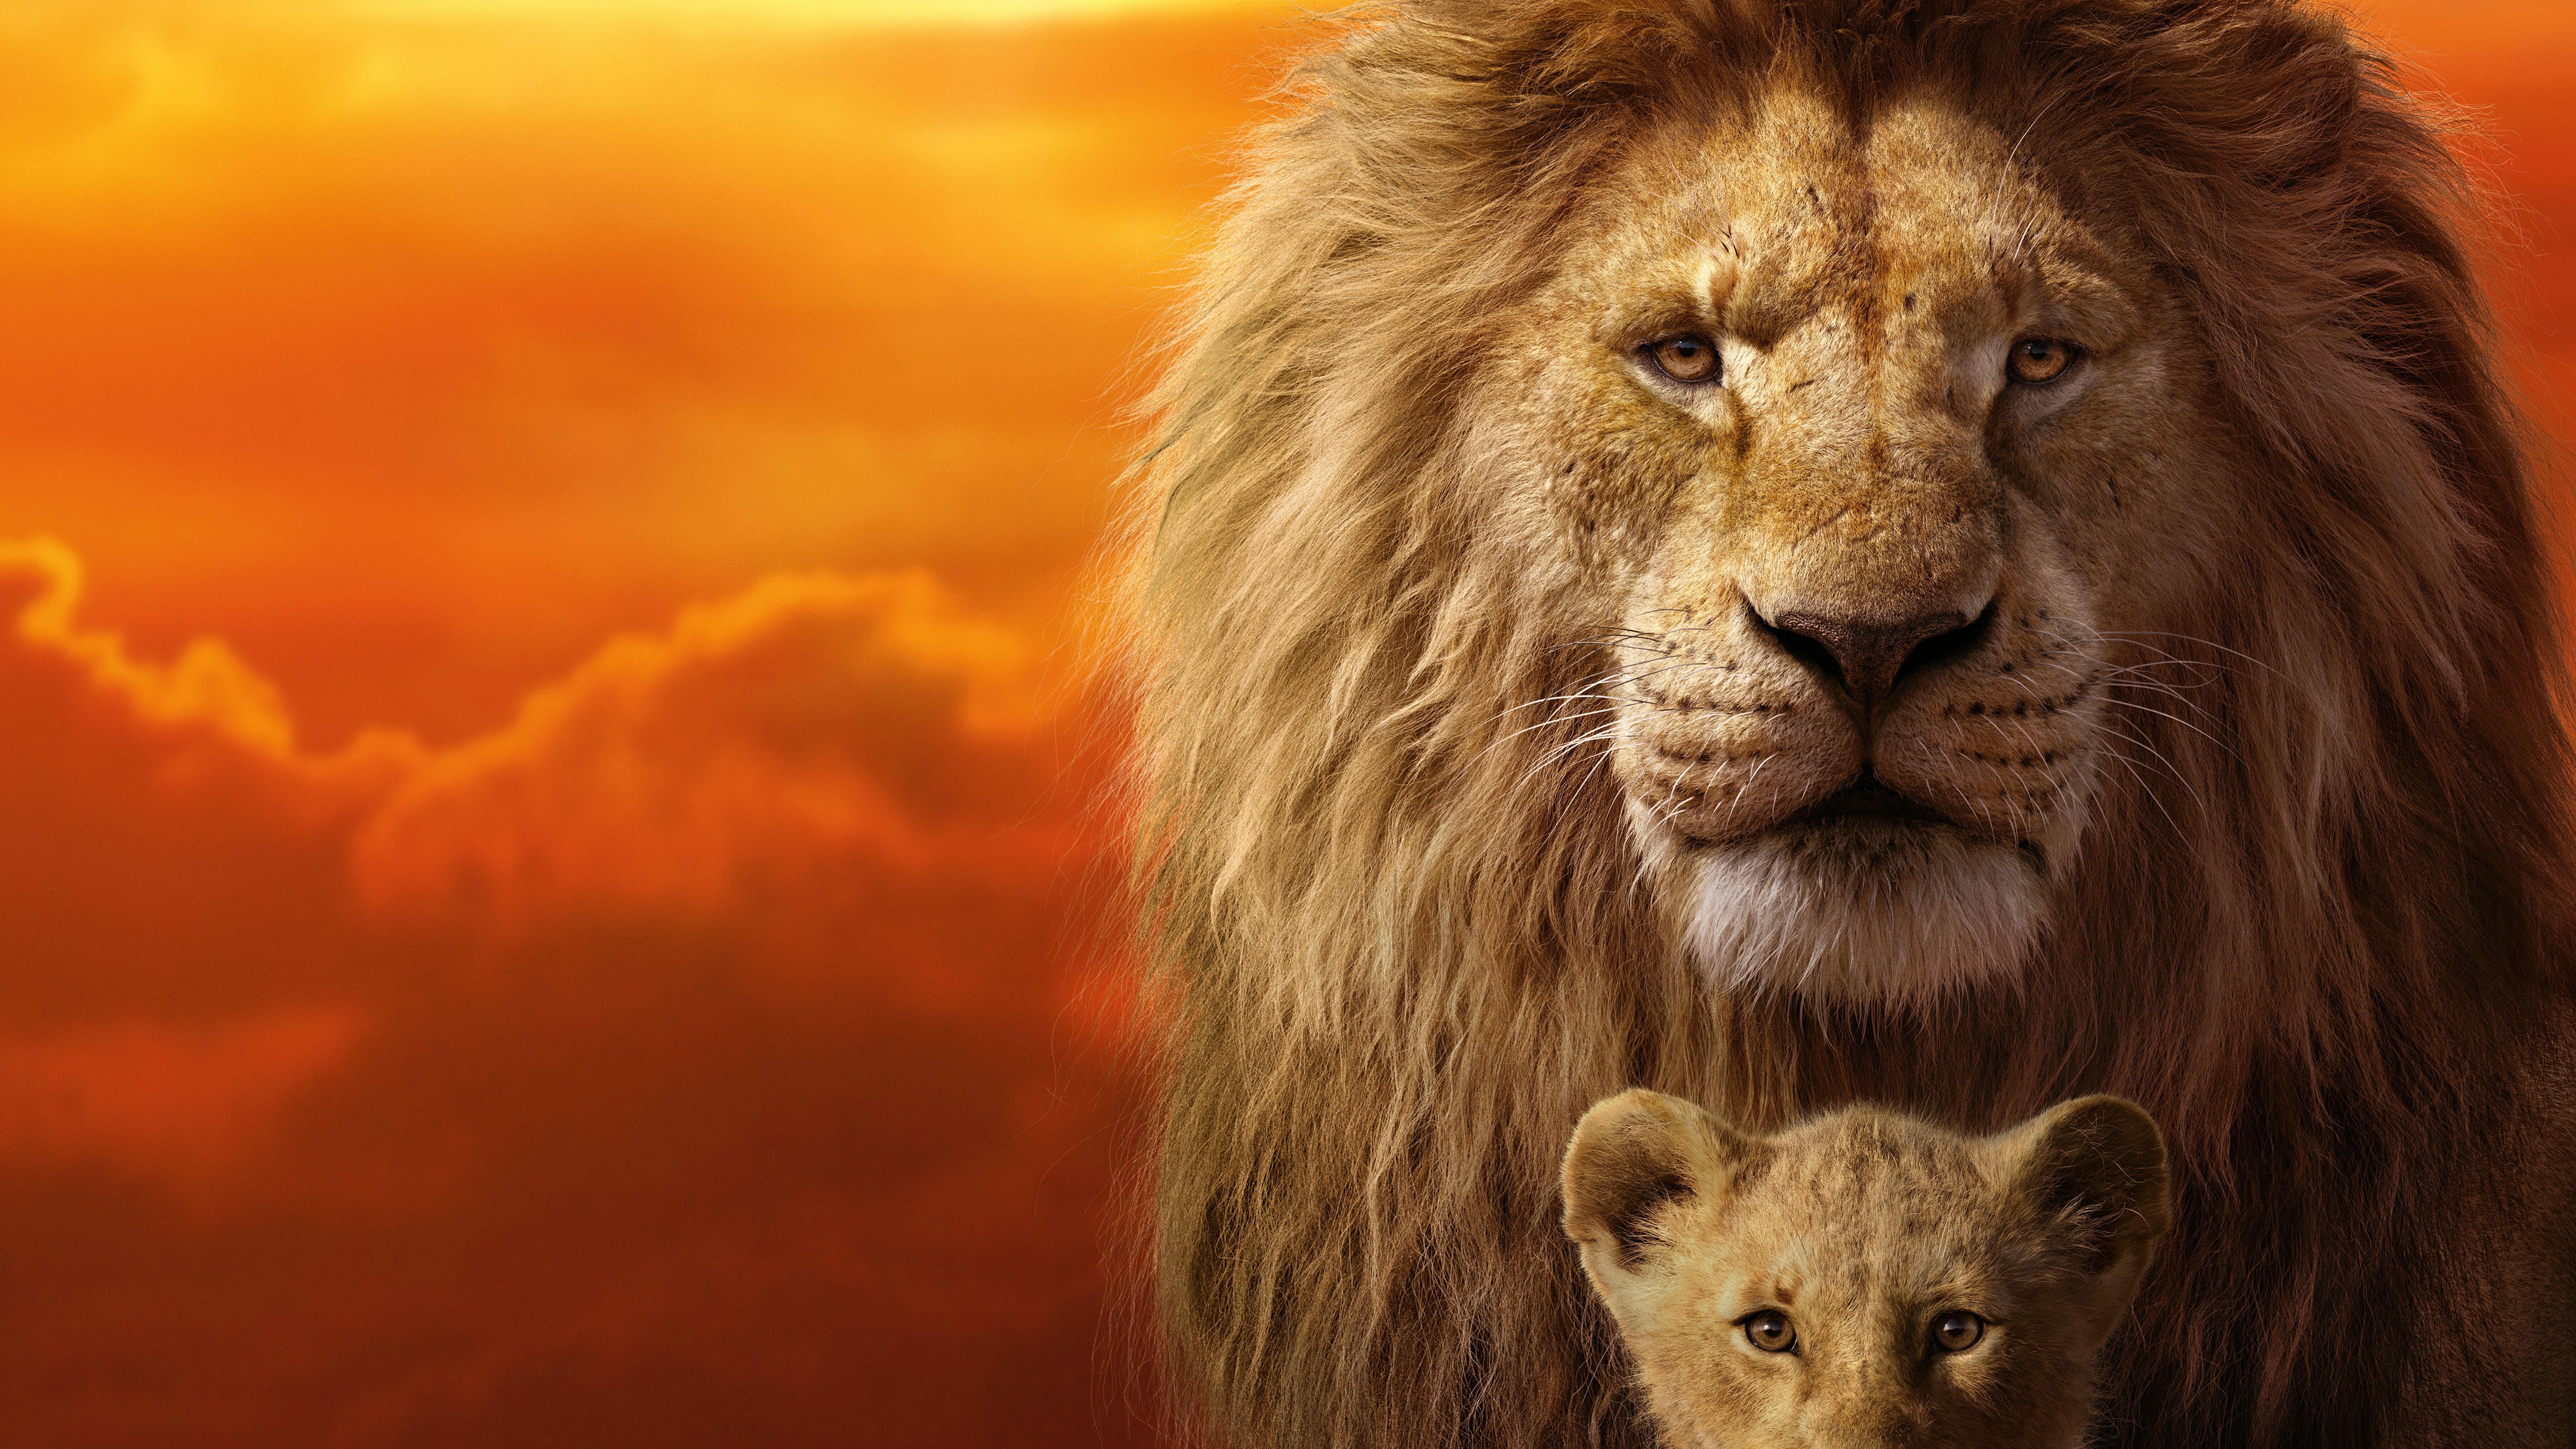 Download The Lion King 2019 Full Hd Quality